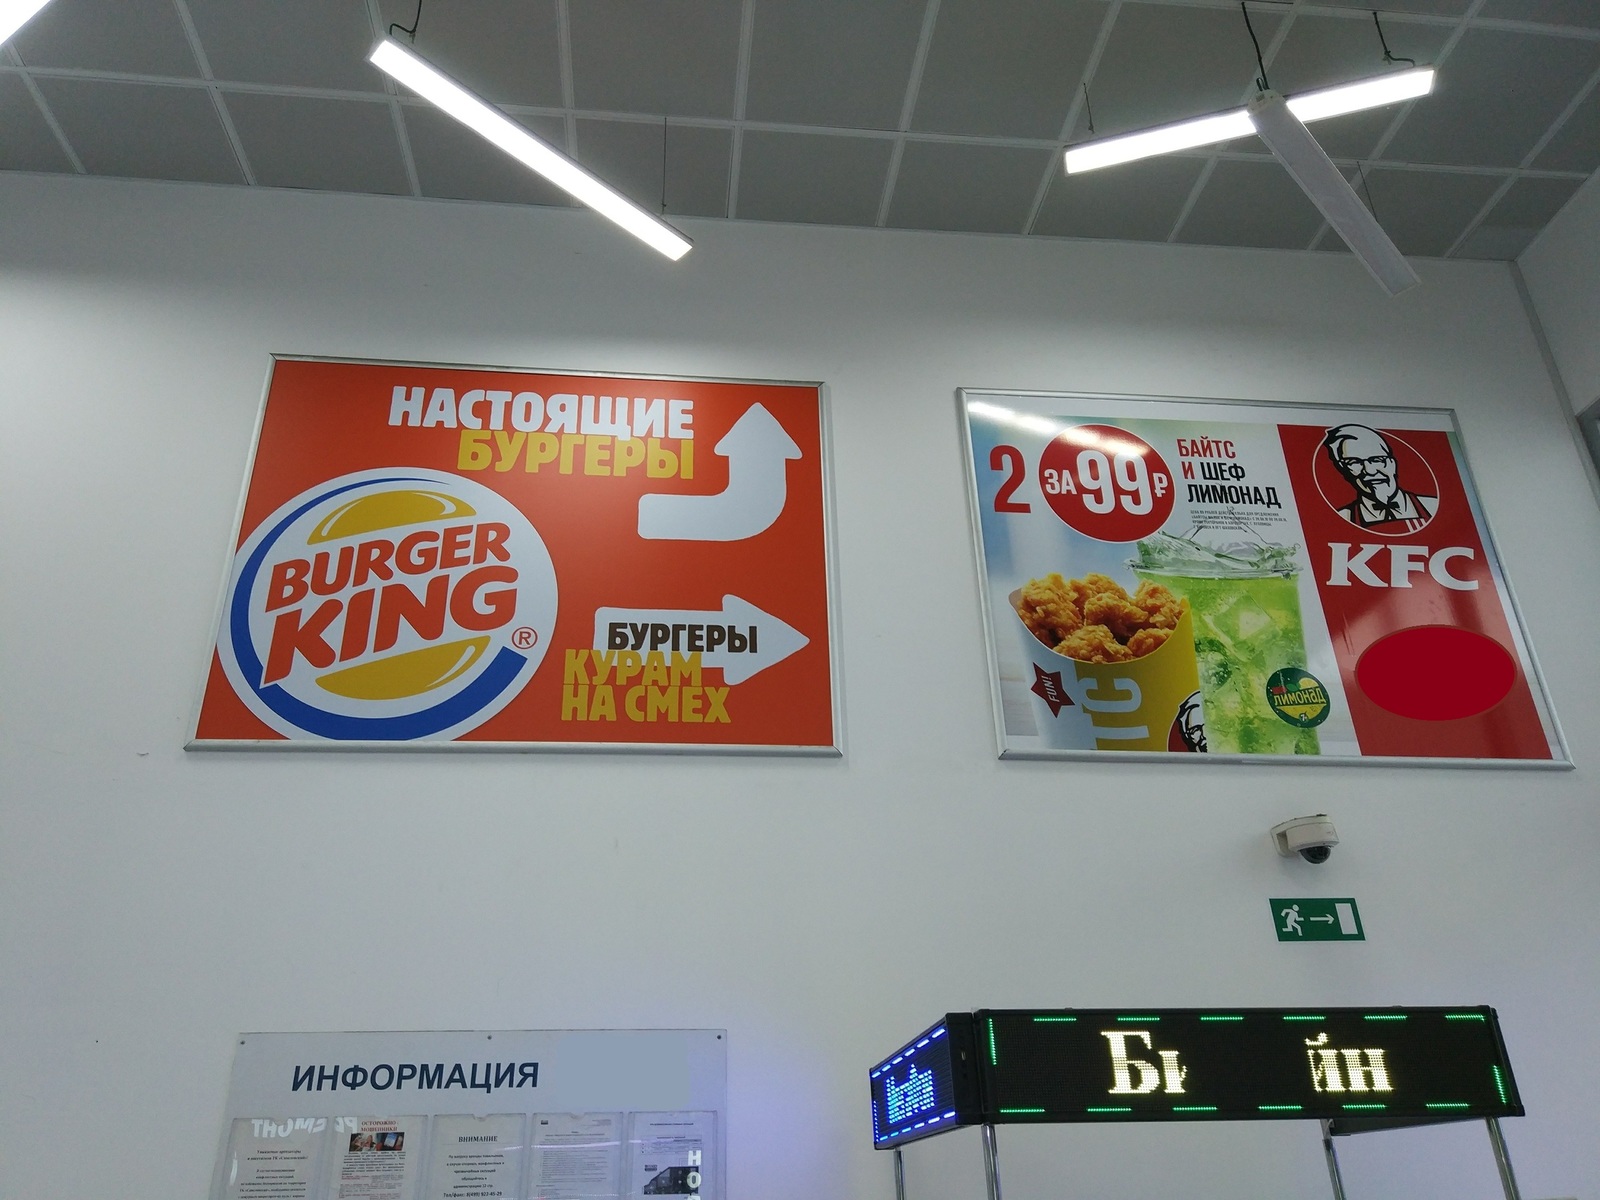 Hypocrisy Burger King 2 - My, Advertising, Fast food, Public catering, Burger King, KFC, Competitors, Competition